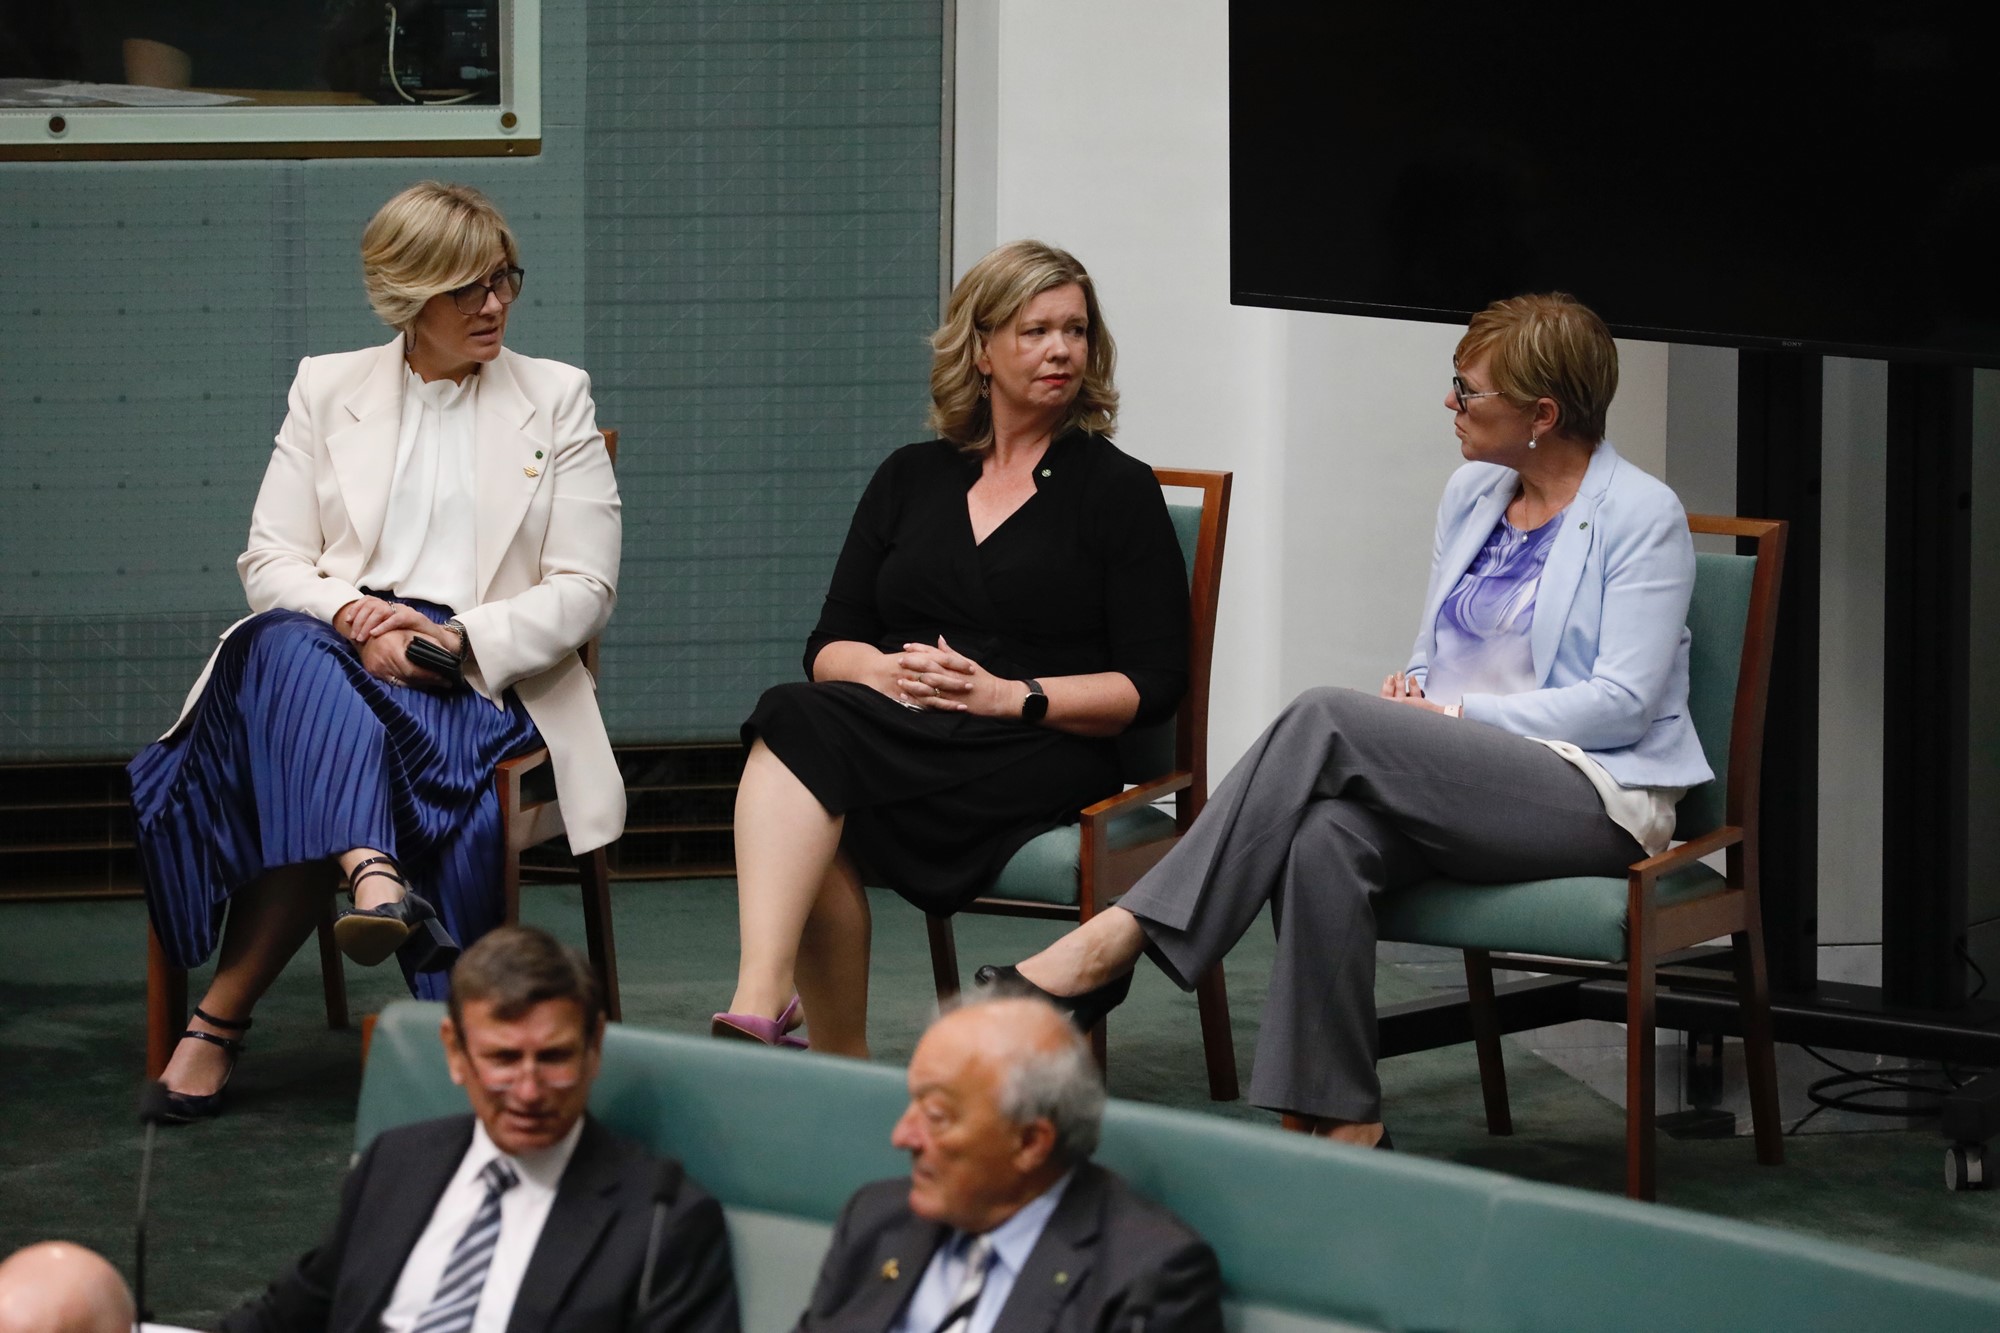 Three female MPs sit together in parliament.